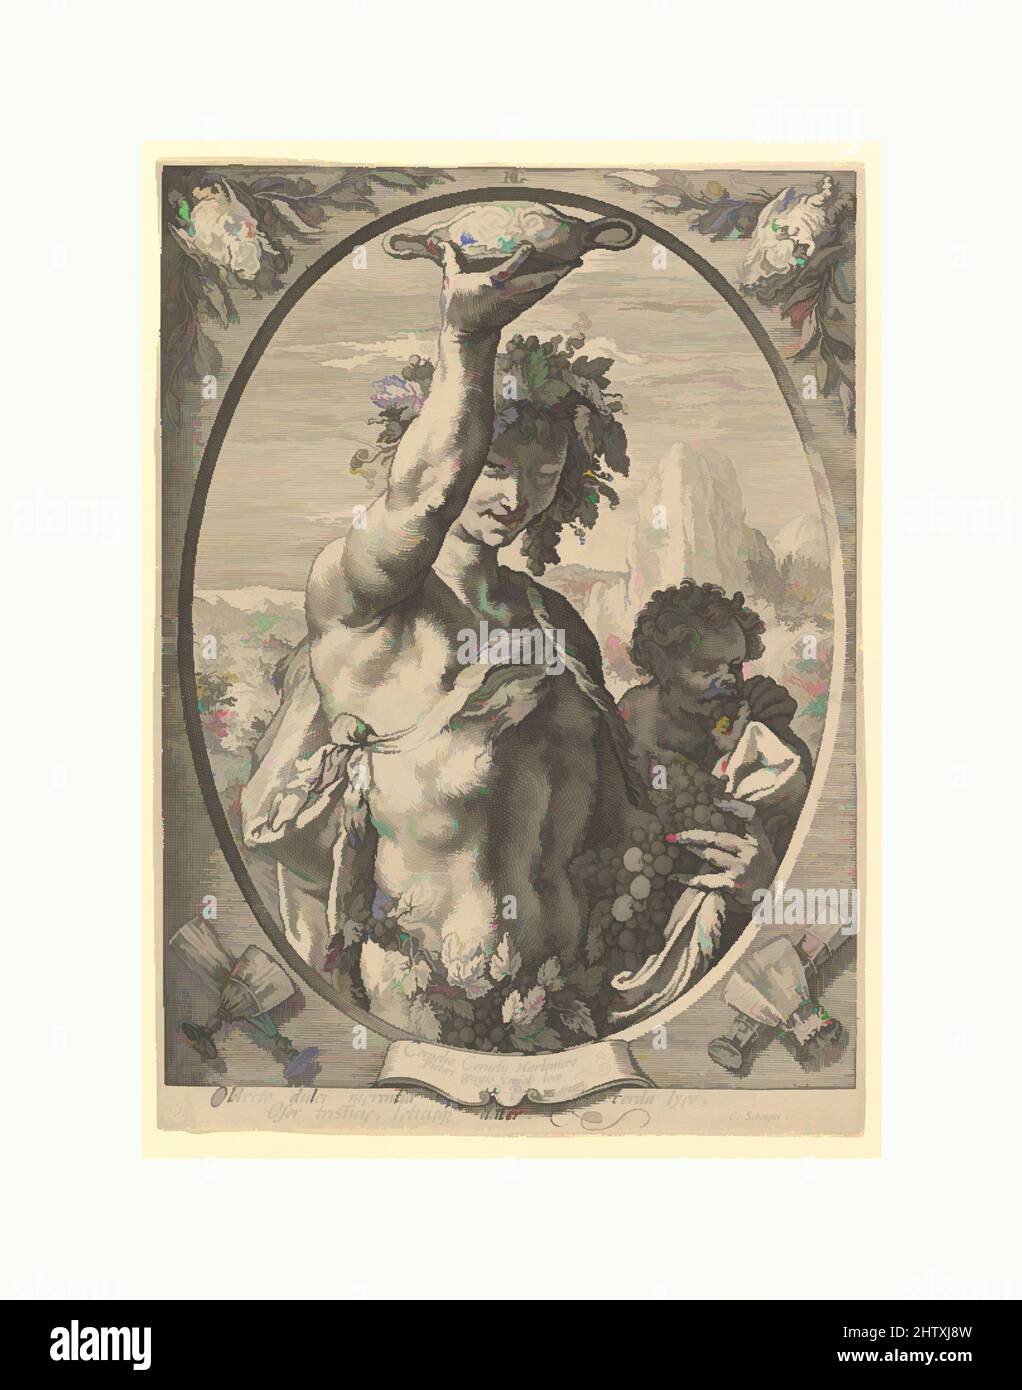 Art inspired by Bacchus, n.d., Engraving, sheet: 9 13/16 x 7 3/16 in. (25 x 18.2 cm), Prints, Hendrick Goltzius (Netherlandish, Mühlbracht 1558–1617 Haarlem, Classic works modernized by Artotop with a splash of modernity. Shapes, color and value, eye-catching visual impact on art. Emotions through freedom of artworks in a contemporary way. A timeless message pursuing a wildly creative new direction. Artists turning to the digital medium and creating the Artotop NFT Stock Photo